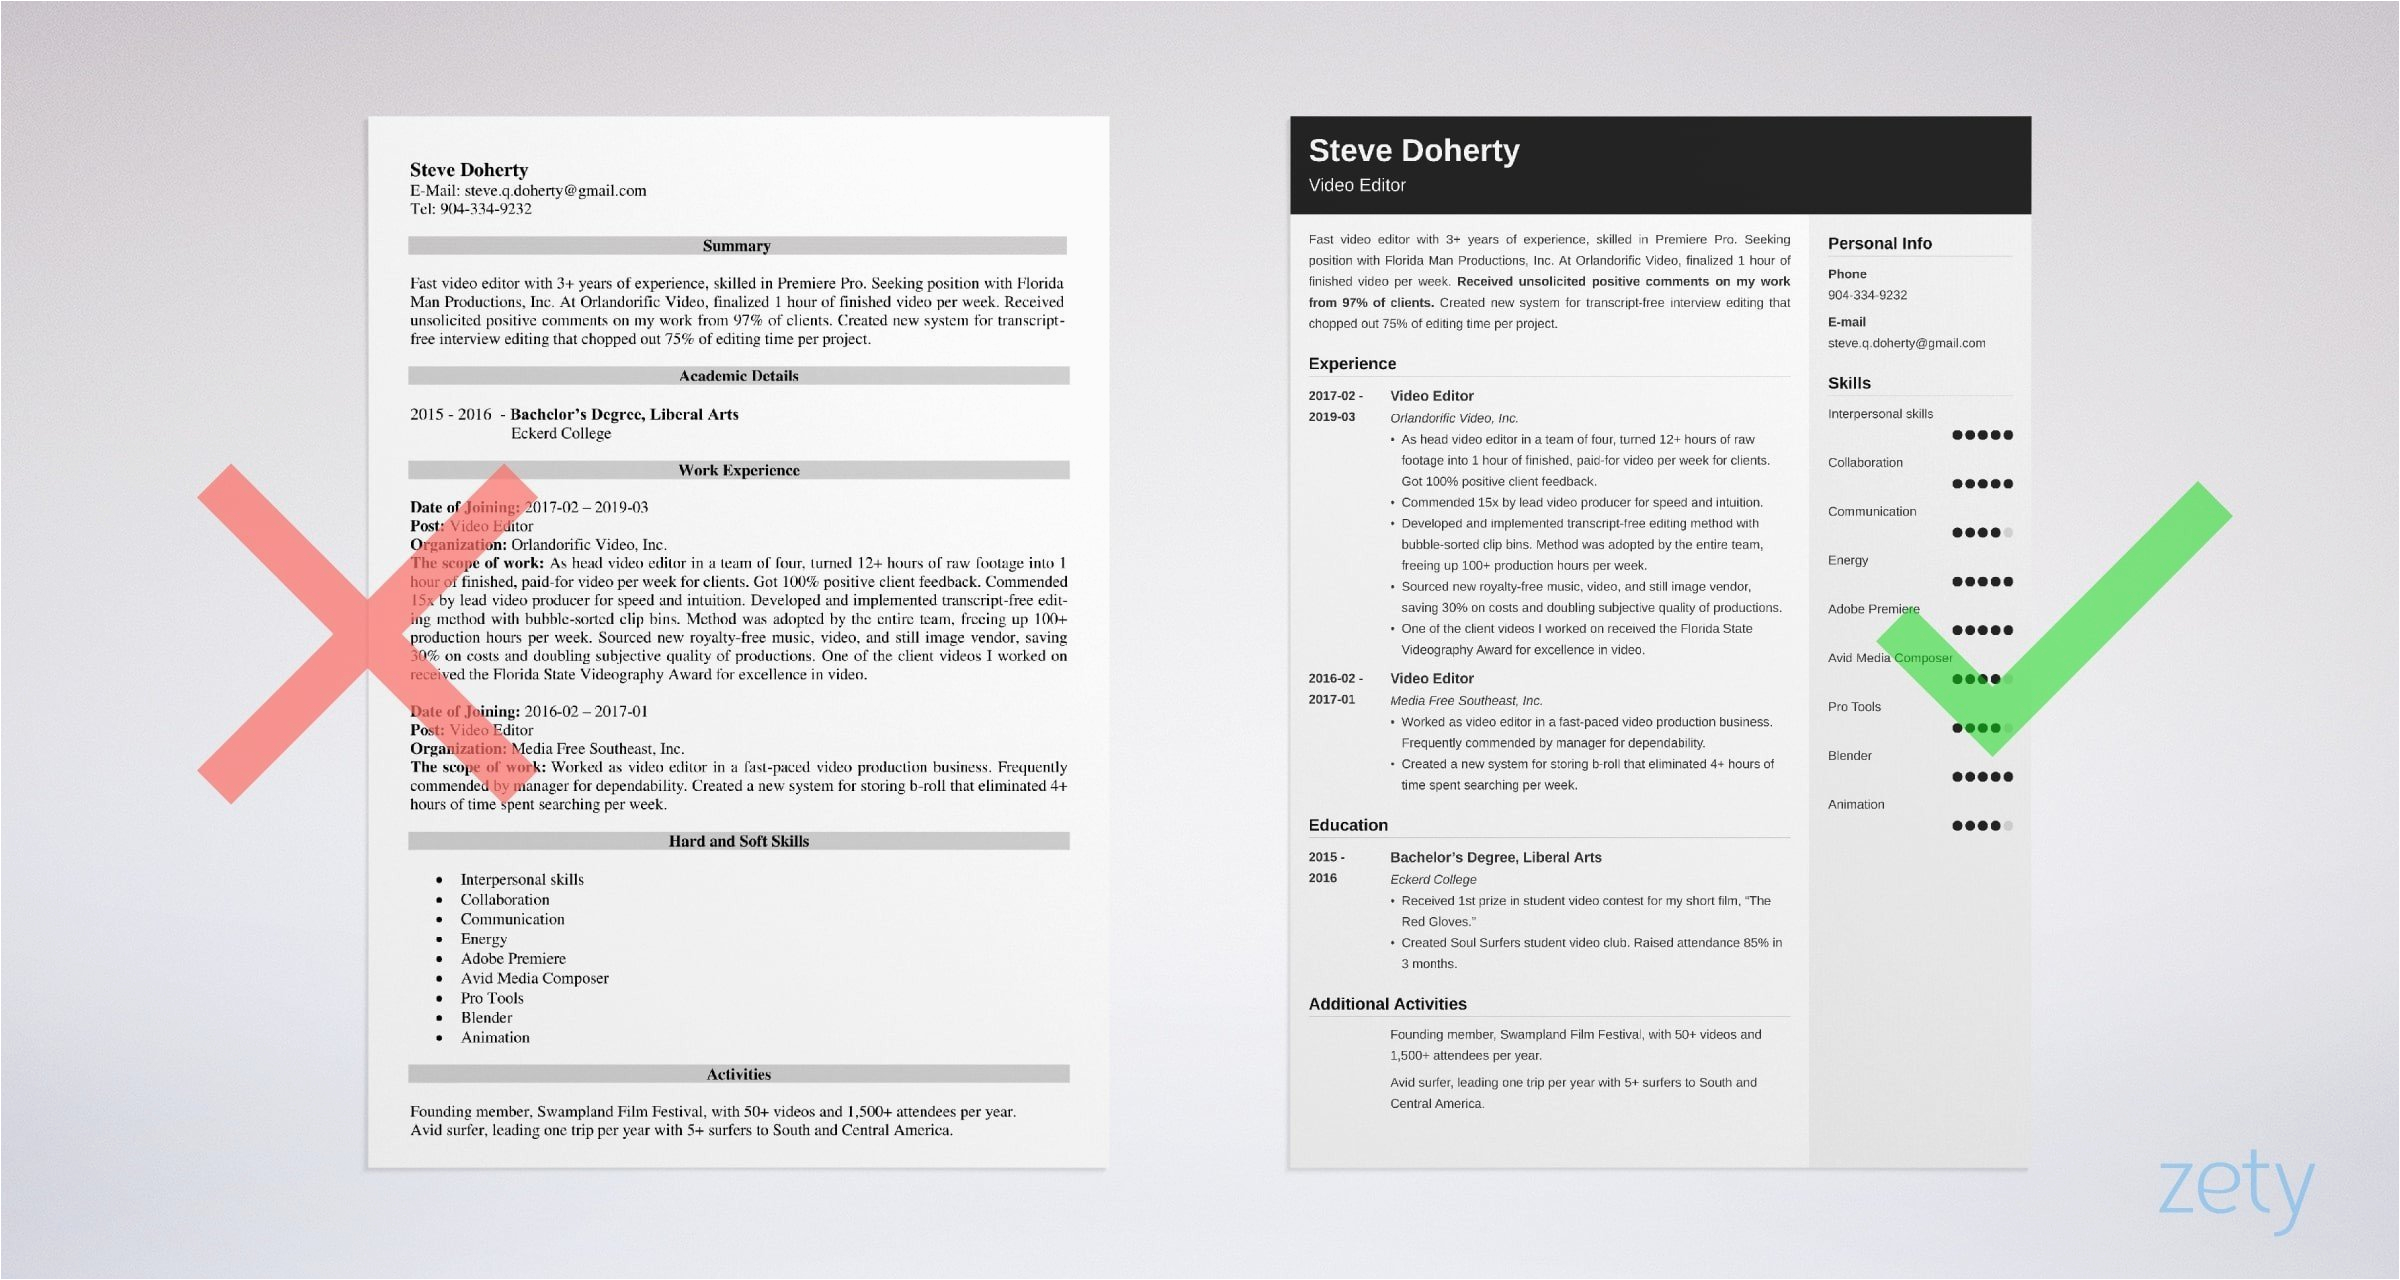 Avid assistant Video Editor Resume Samples Video Editor Resume Example Template & Guide